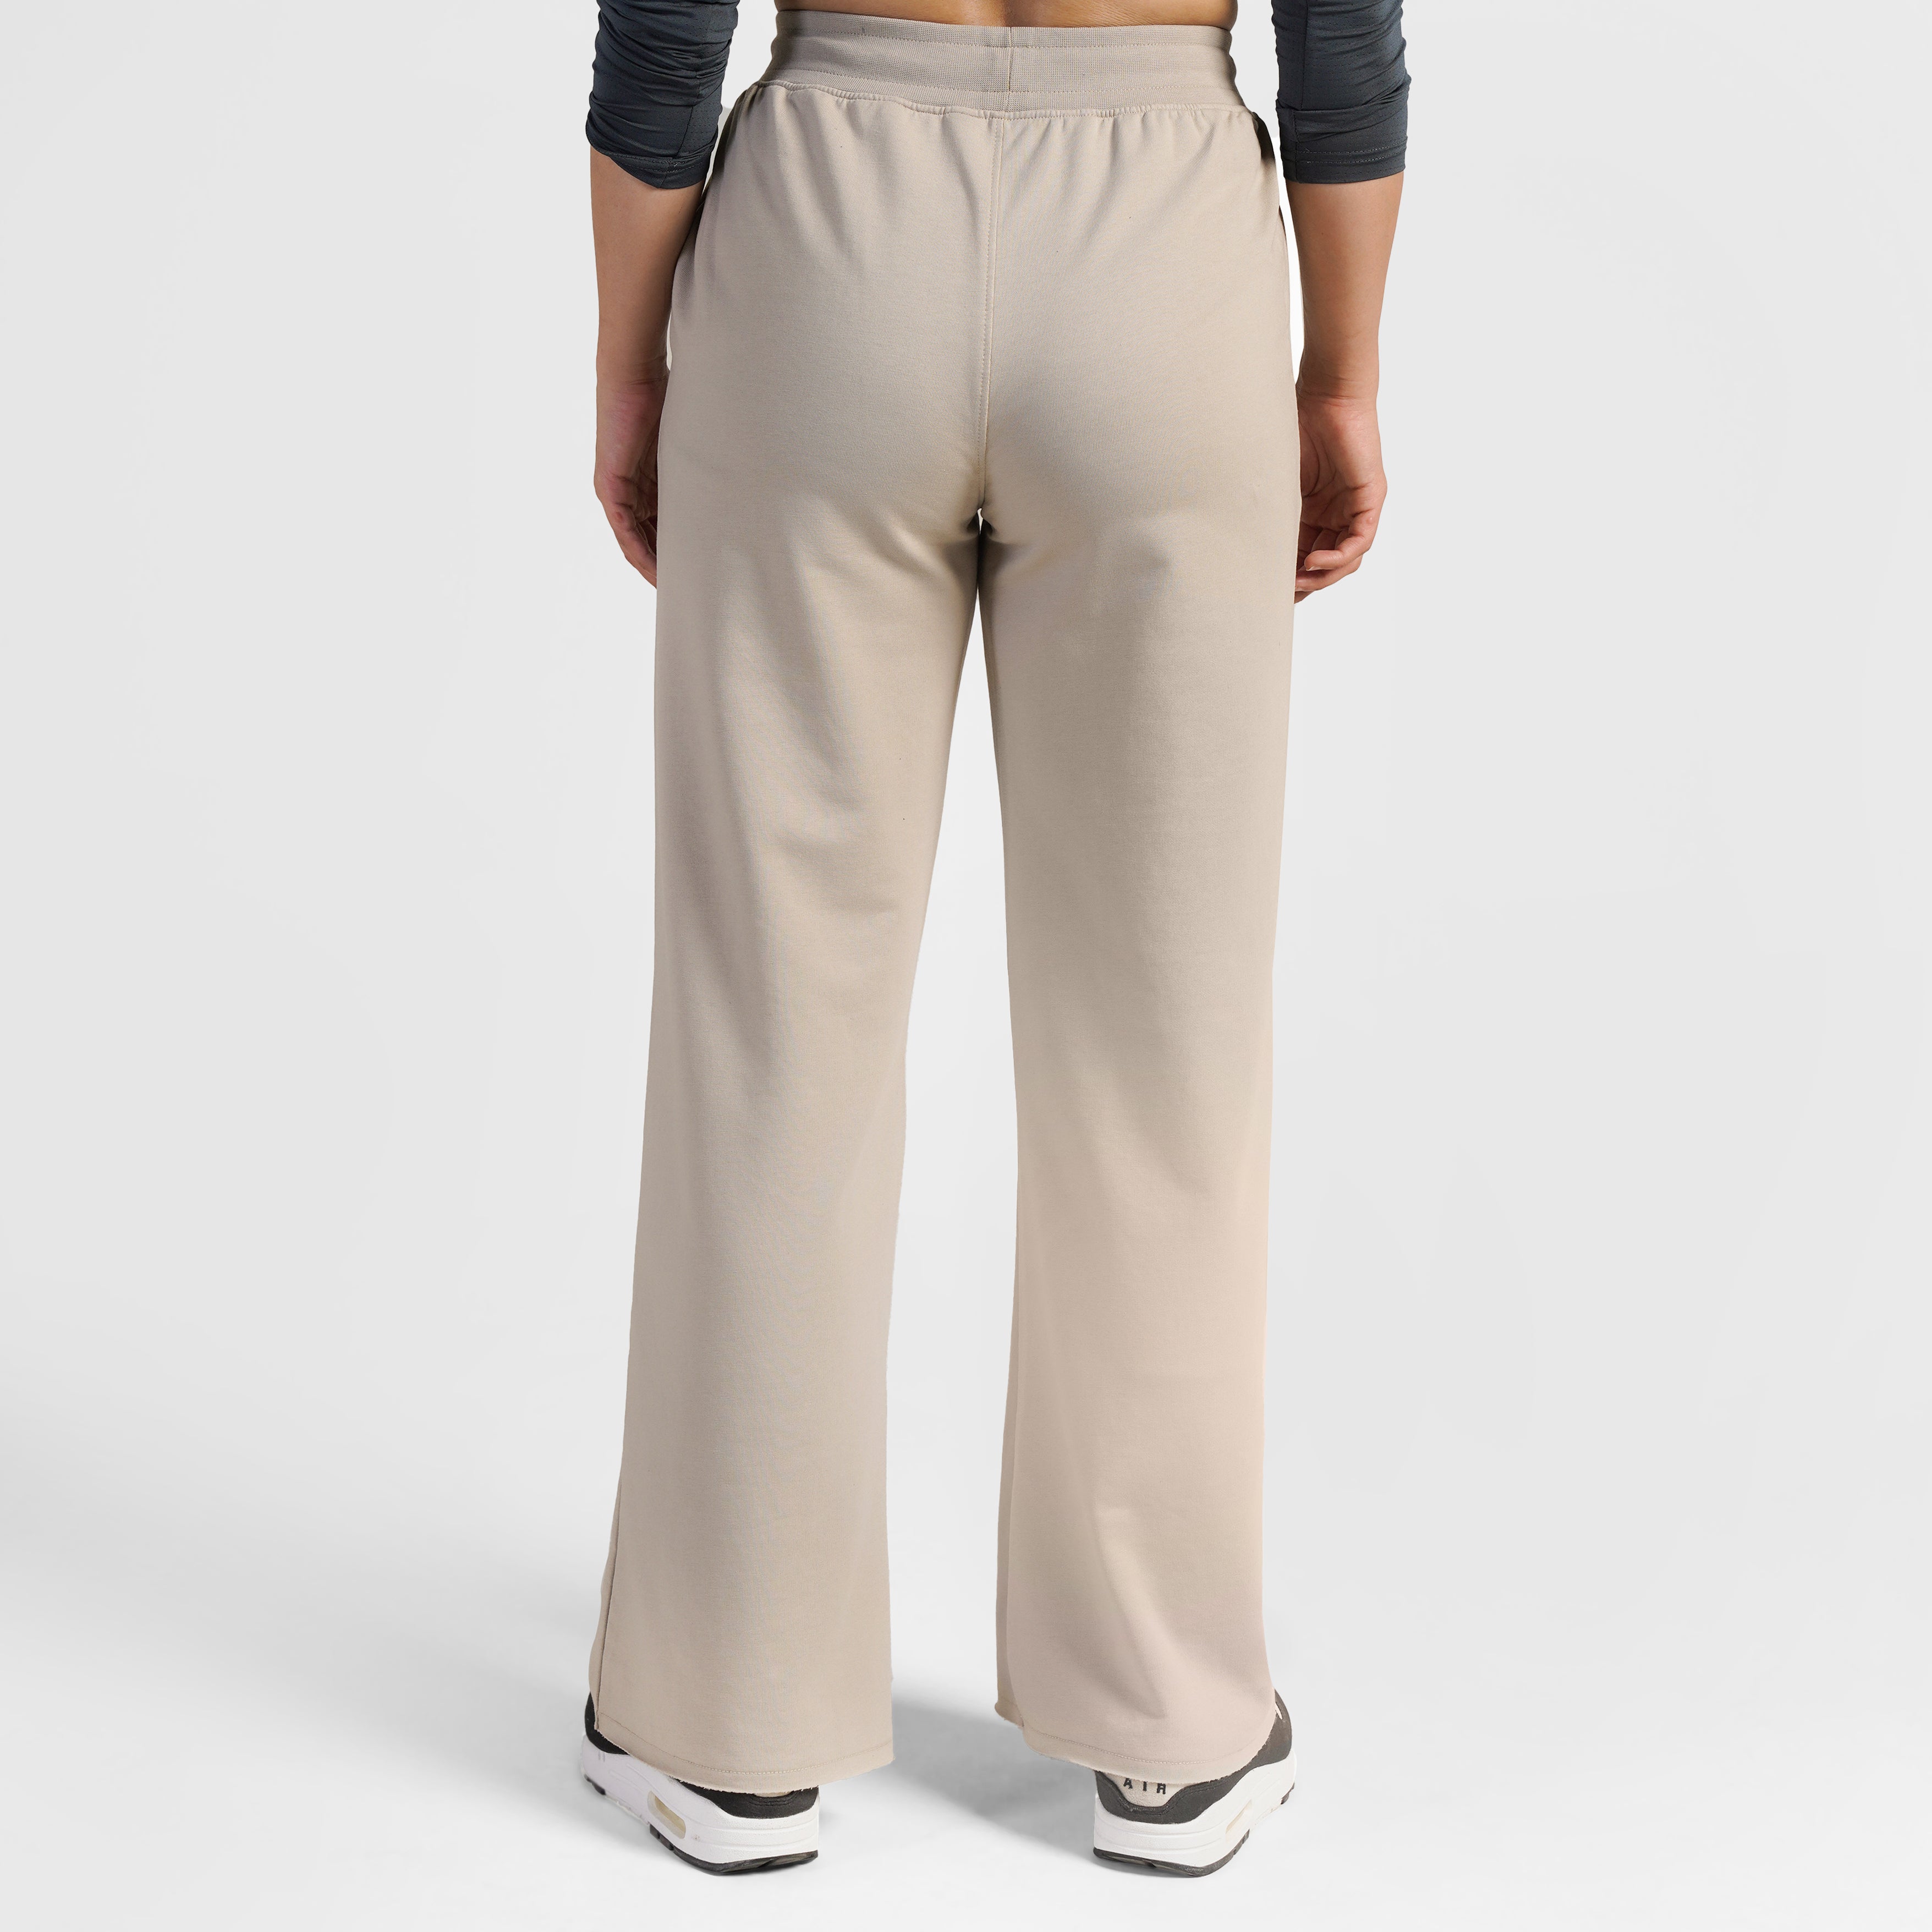 Comfort Max Gym Trousers (Beige)